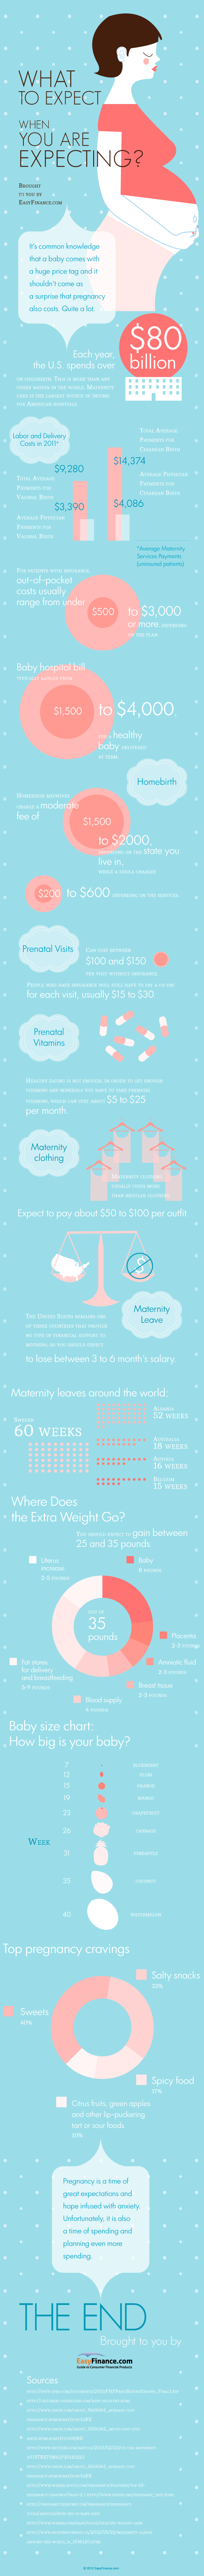 What To Expect When You Are Expecting? (Infographic)